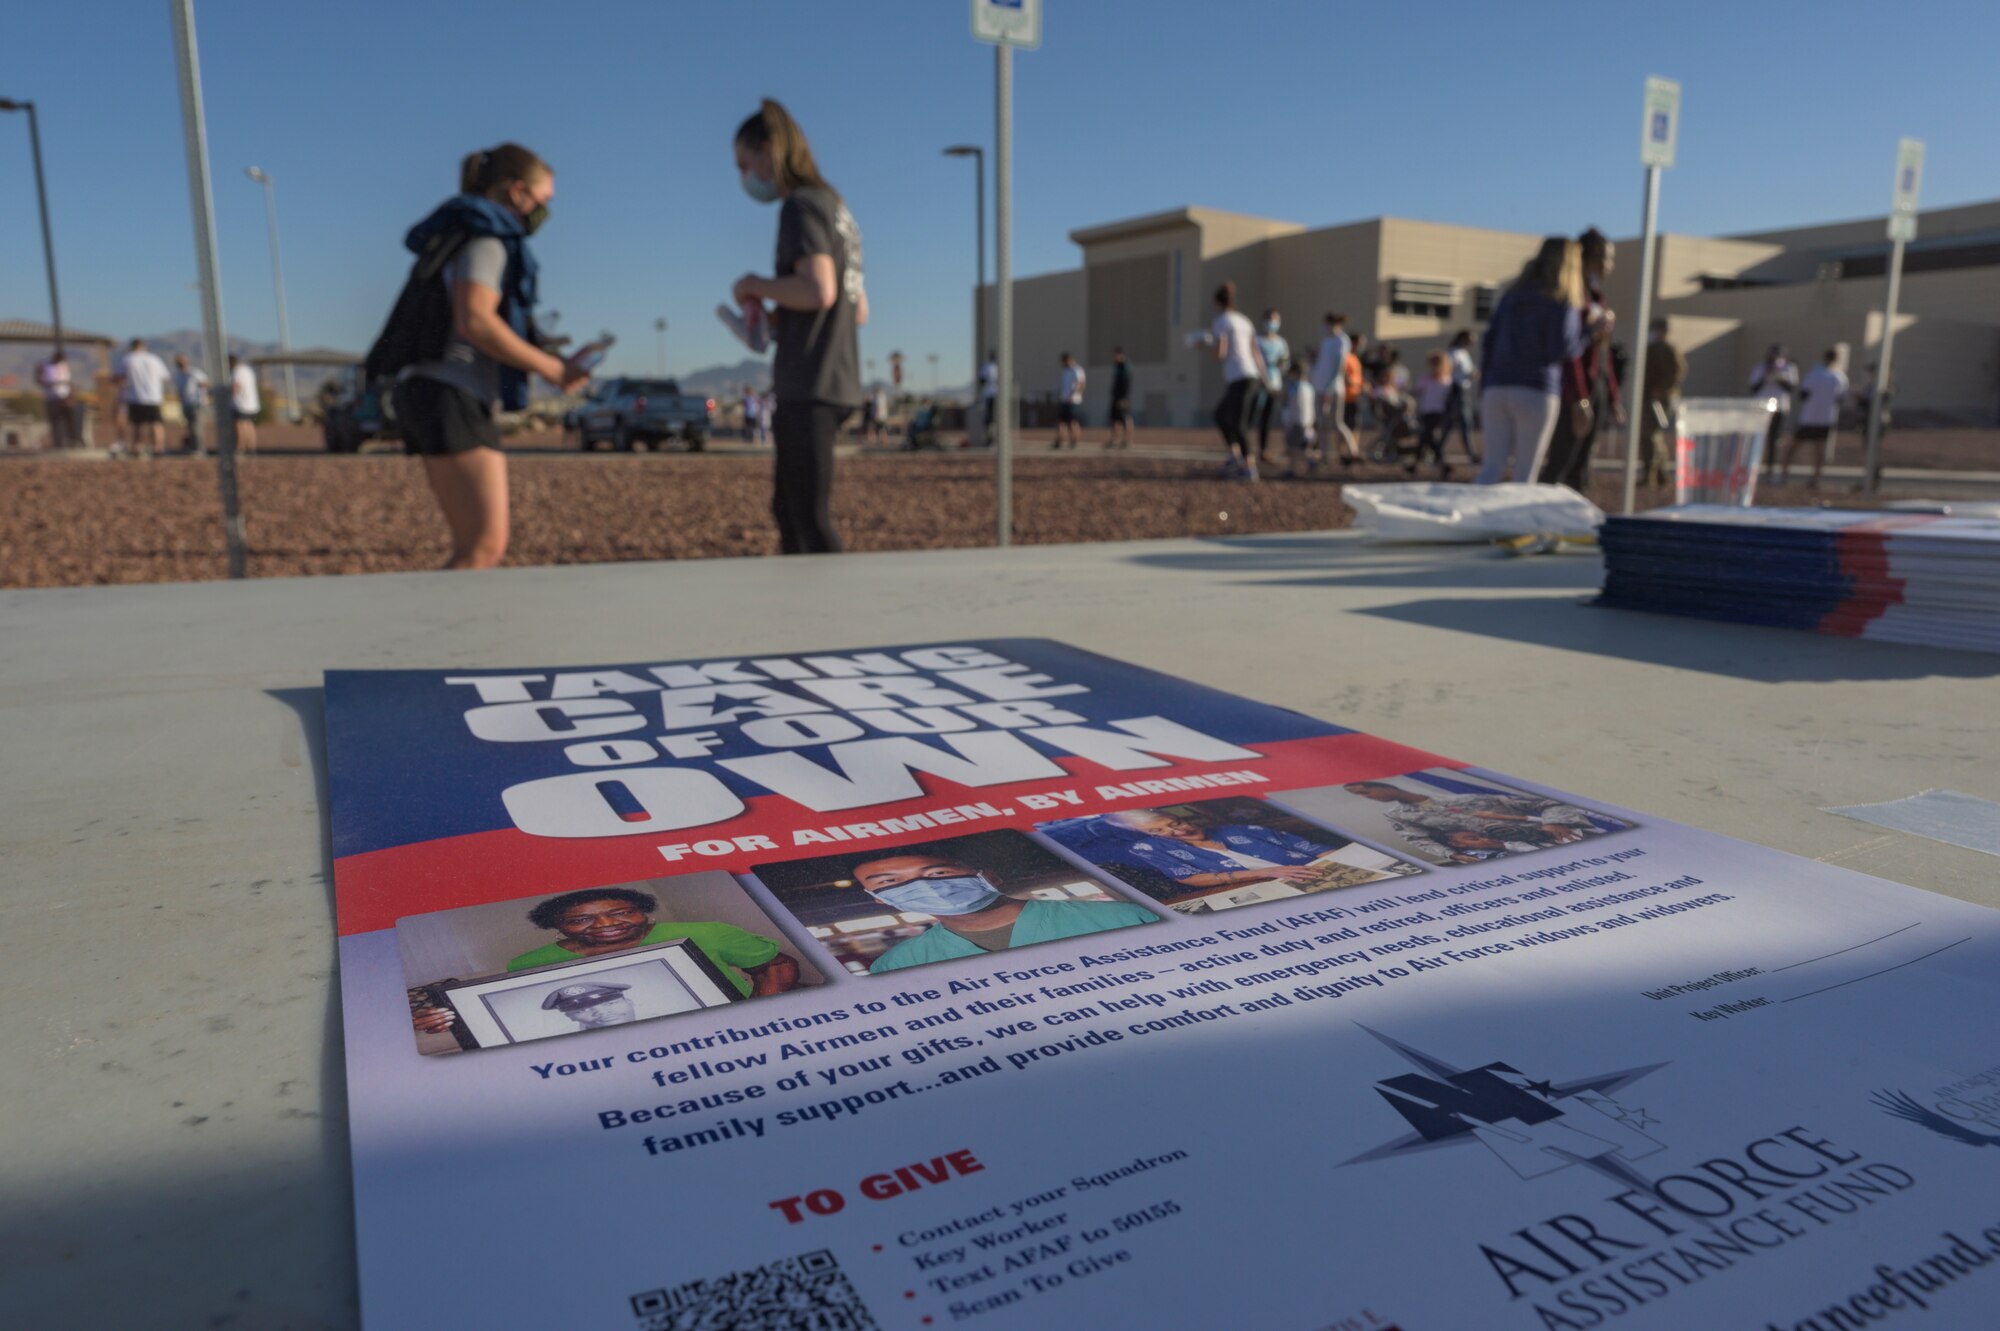 Nellis Air Force Assistance Fund 5k Color Run poster on a  table